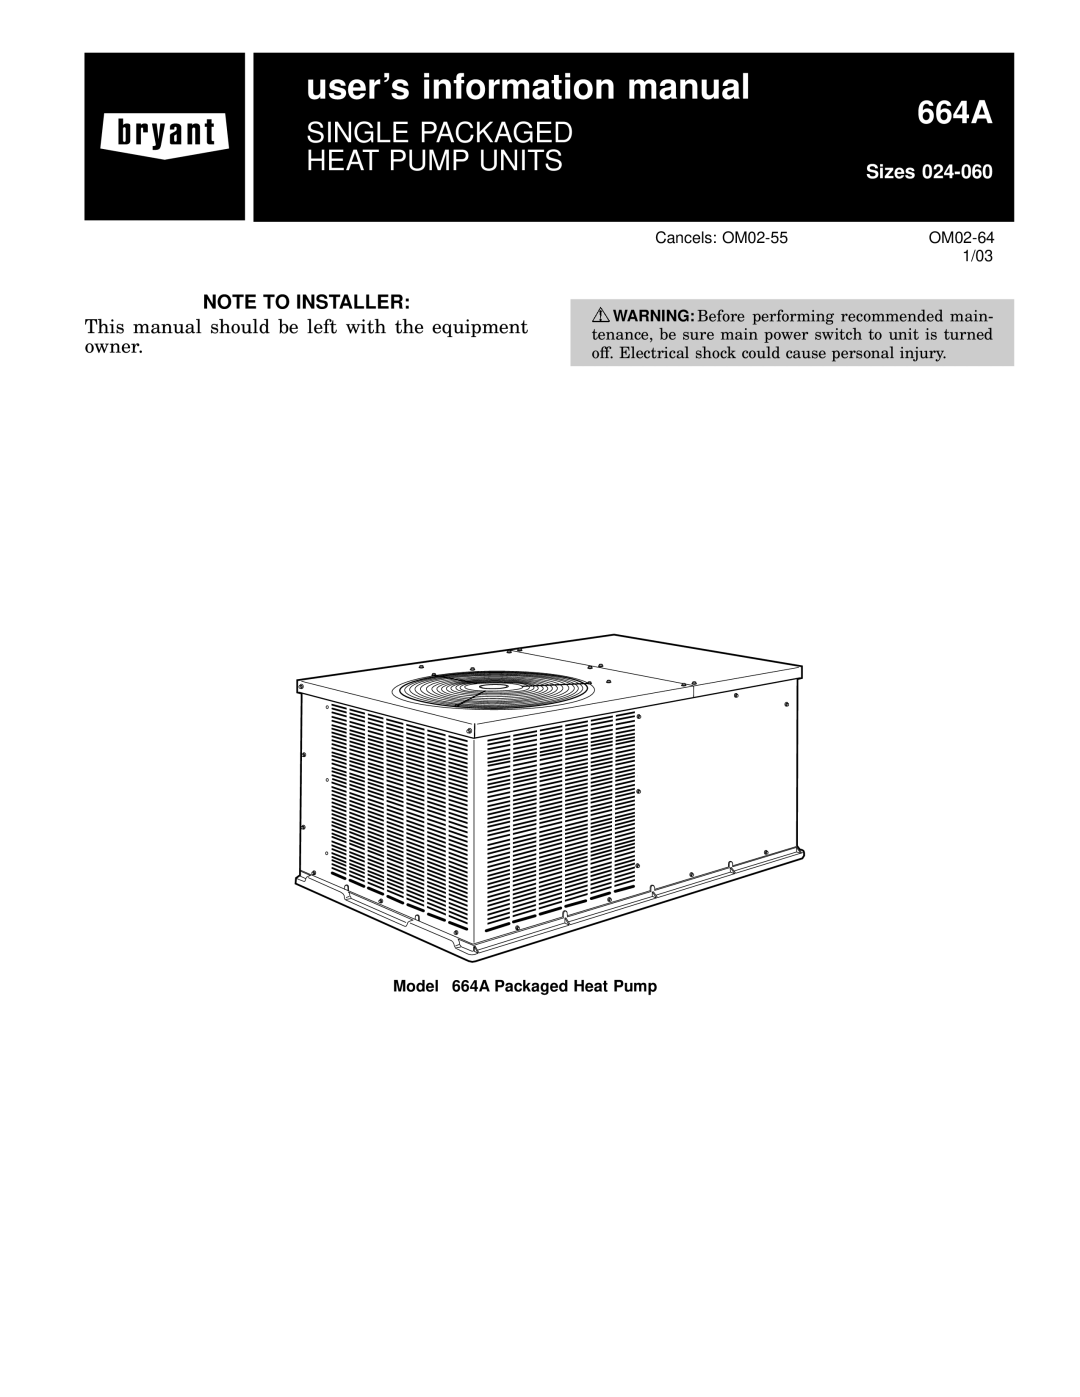 Bryant manual Model 664A Packaged Heat Pump, users information manual, Single Packaged, Heat Pump Units, Sizes 